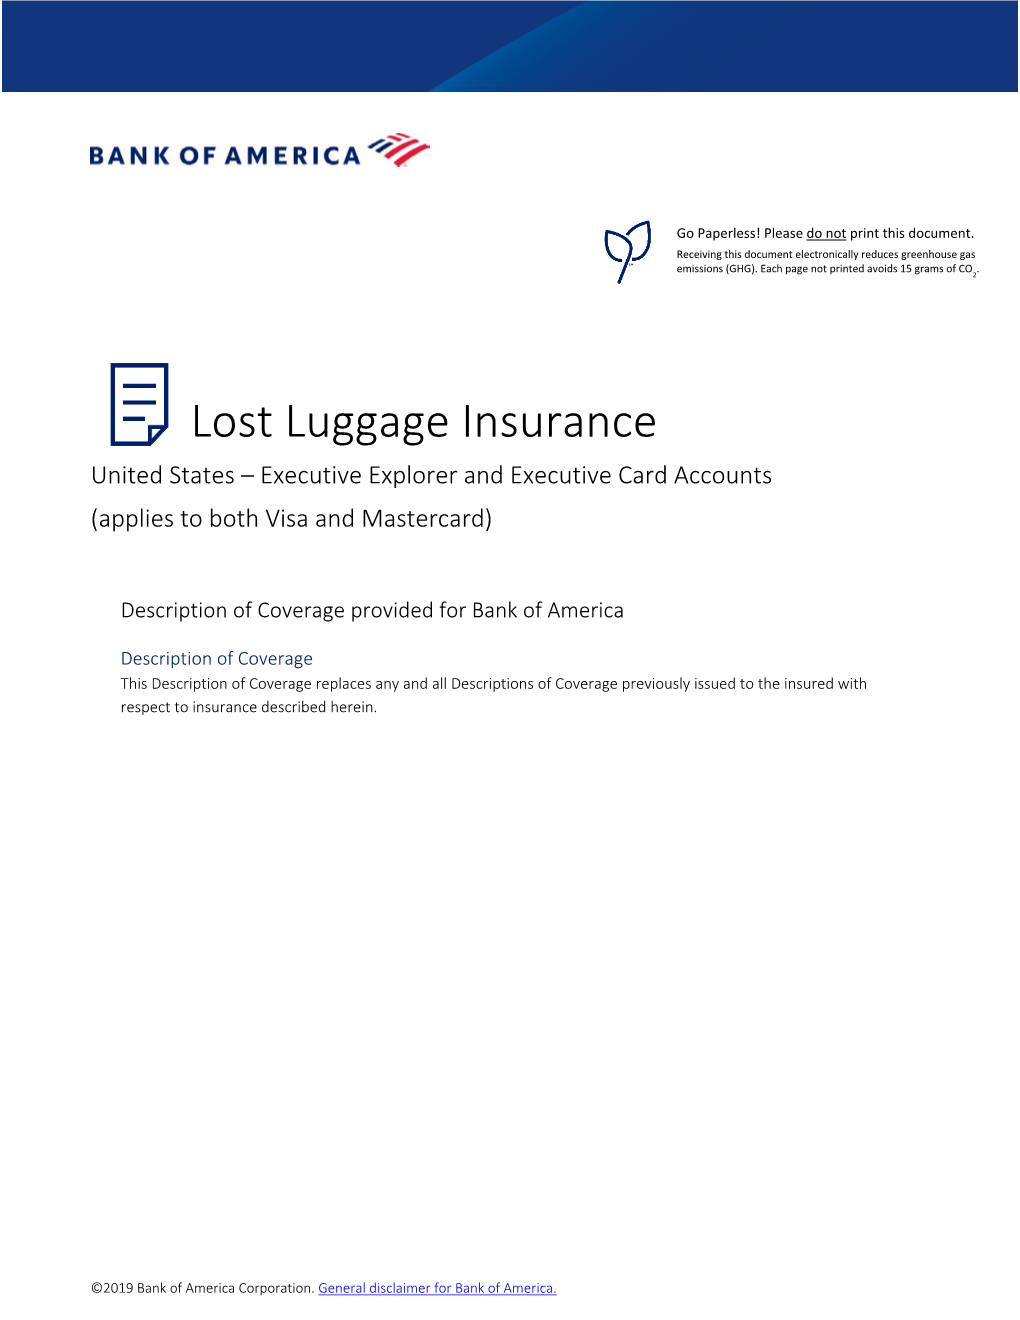 Lost Luggage Insurance United States – Executive Explorer and Executive Card Accounts (Applies to Both Visa and Mastercard)